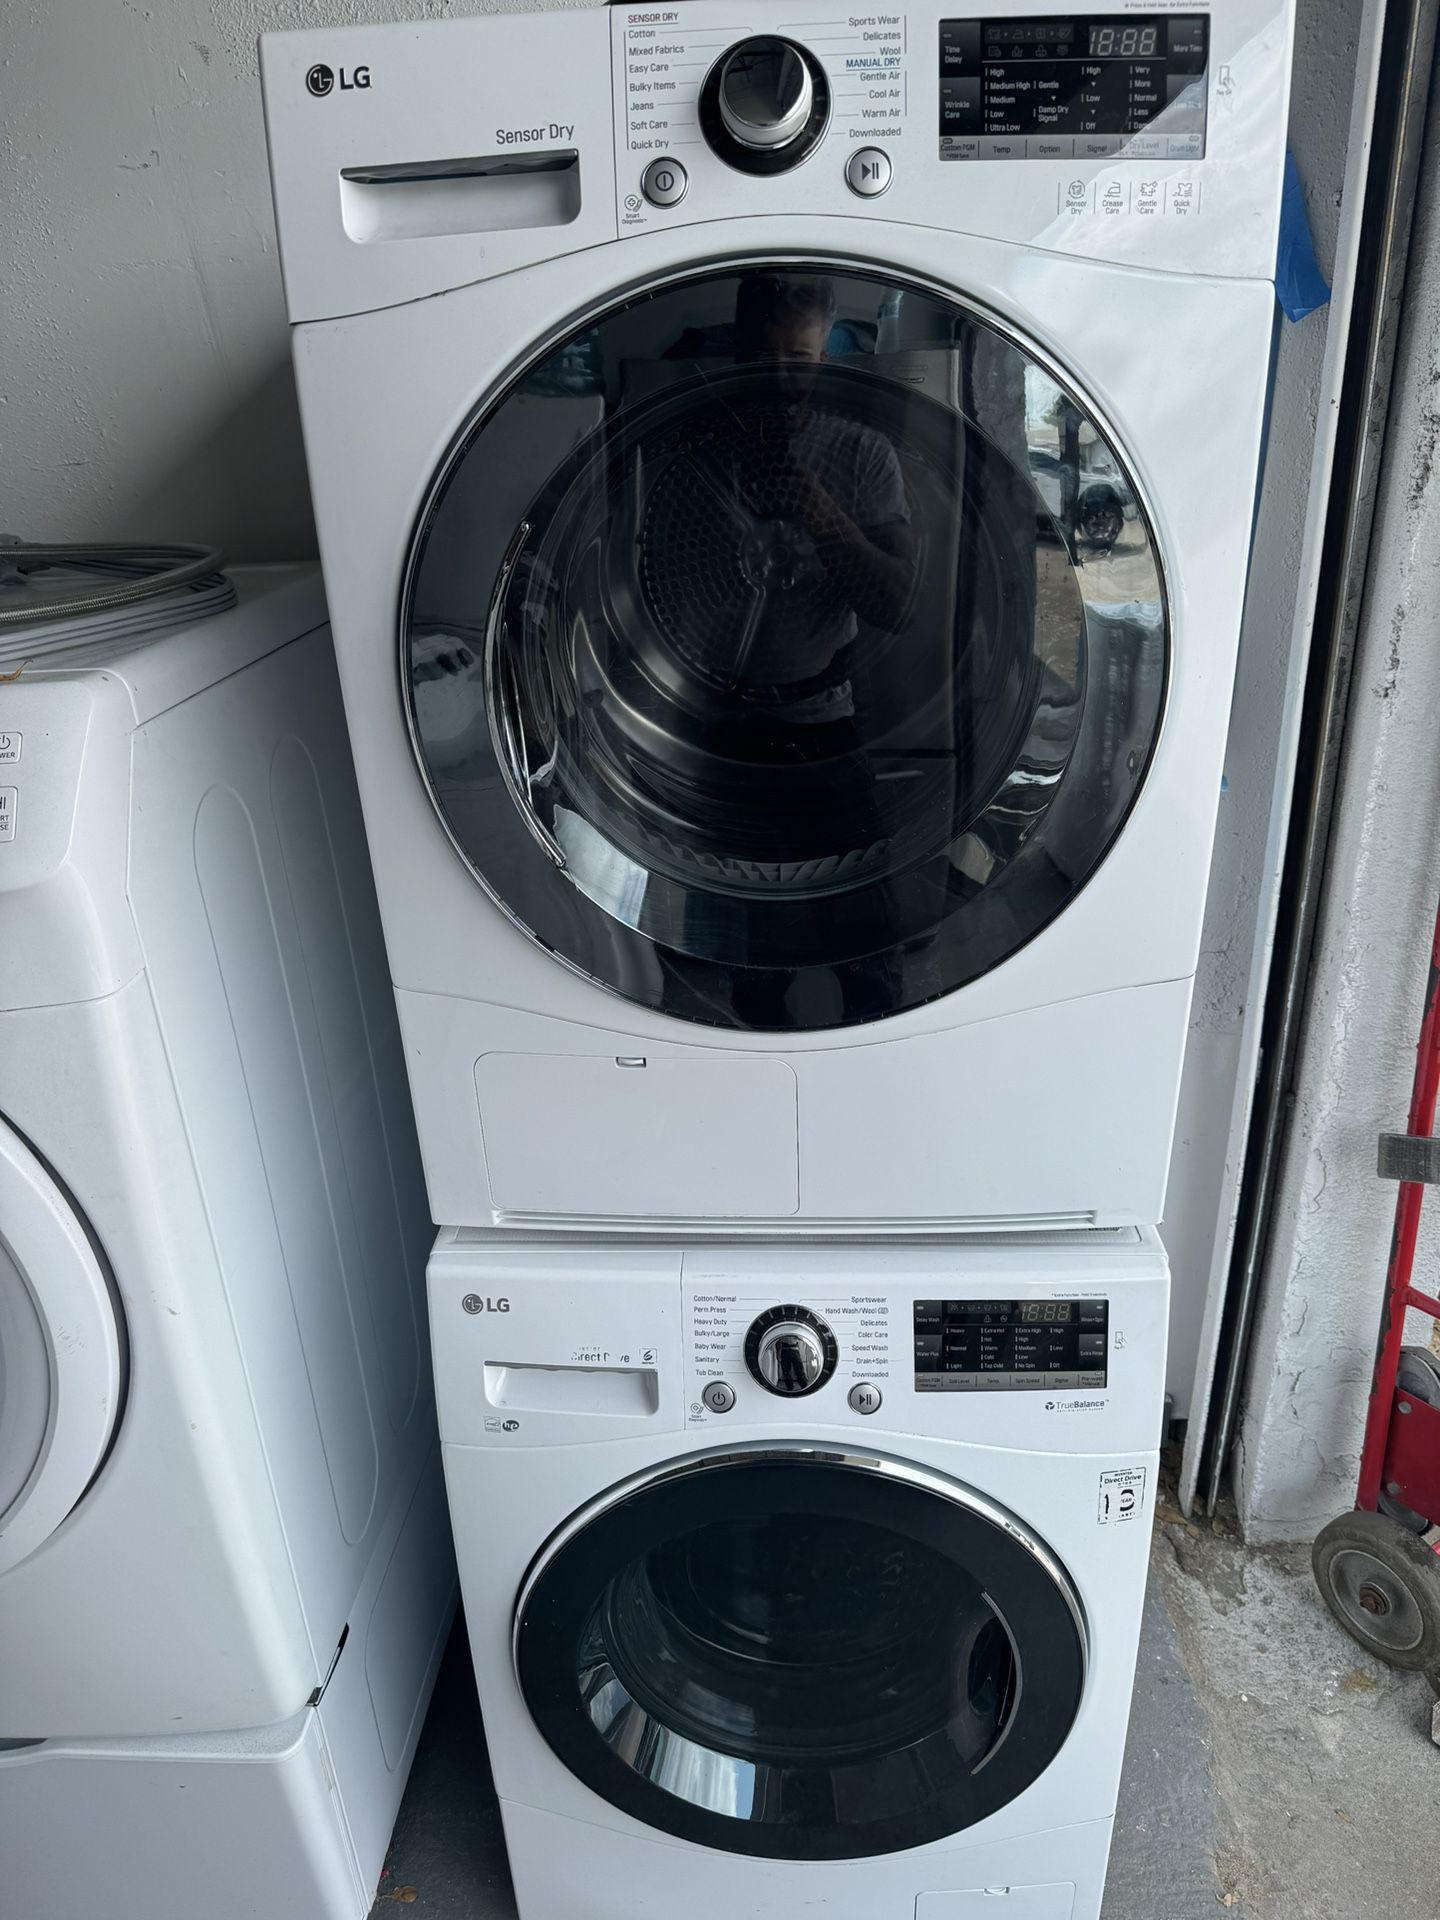 WASHER/DRYER 24” Stackable 